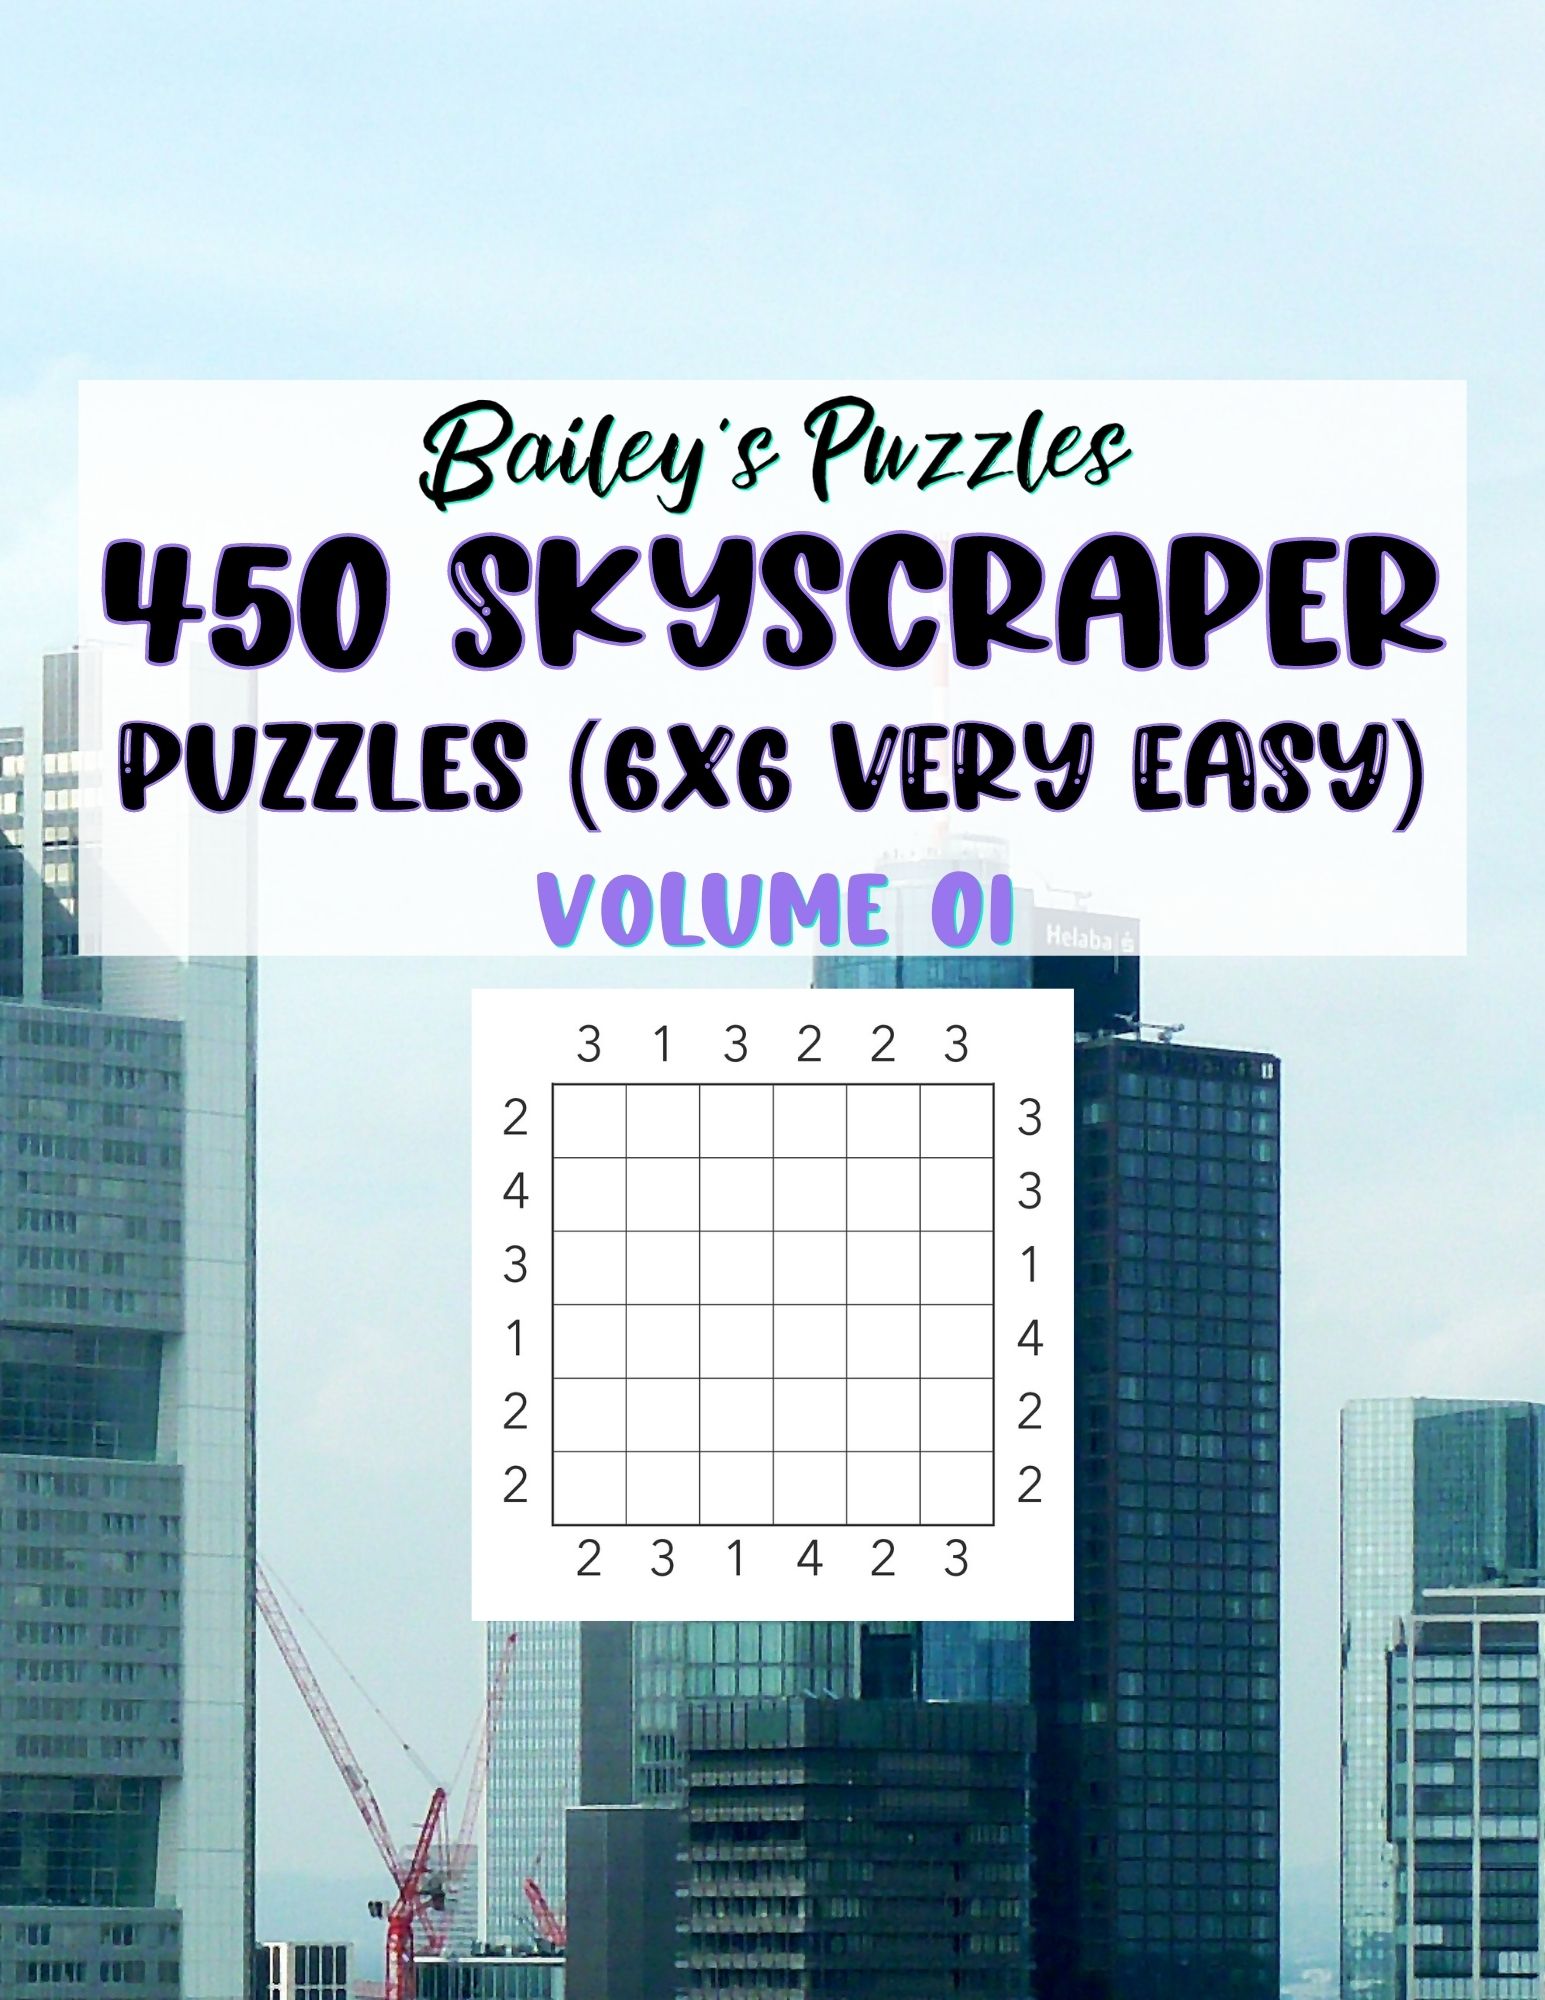 Front Cover - 450 Skyscraper Puzzles (6x6, very easy)